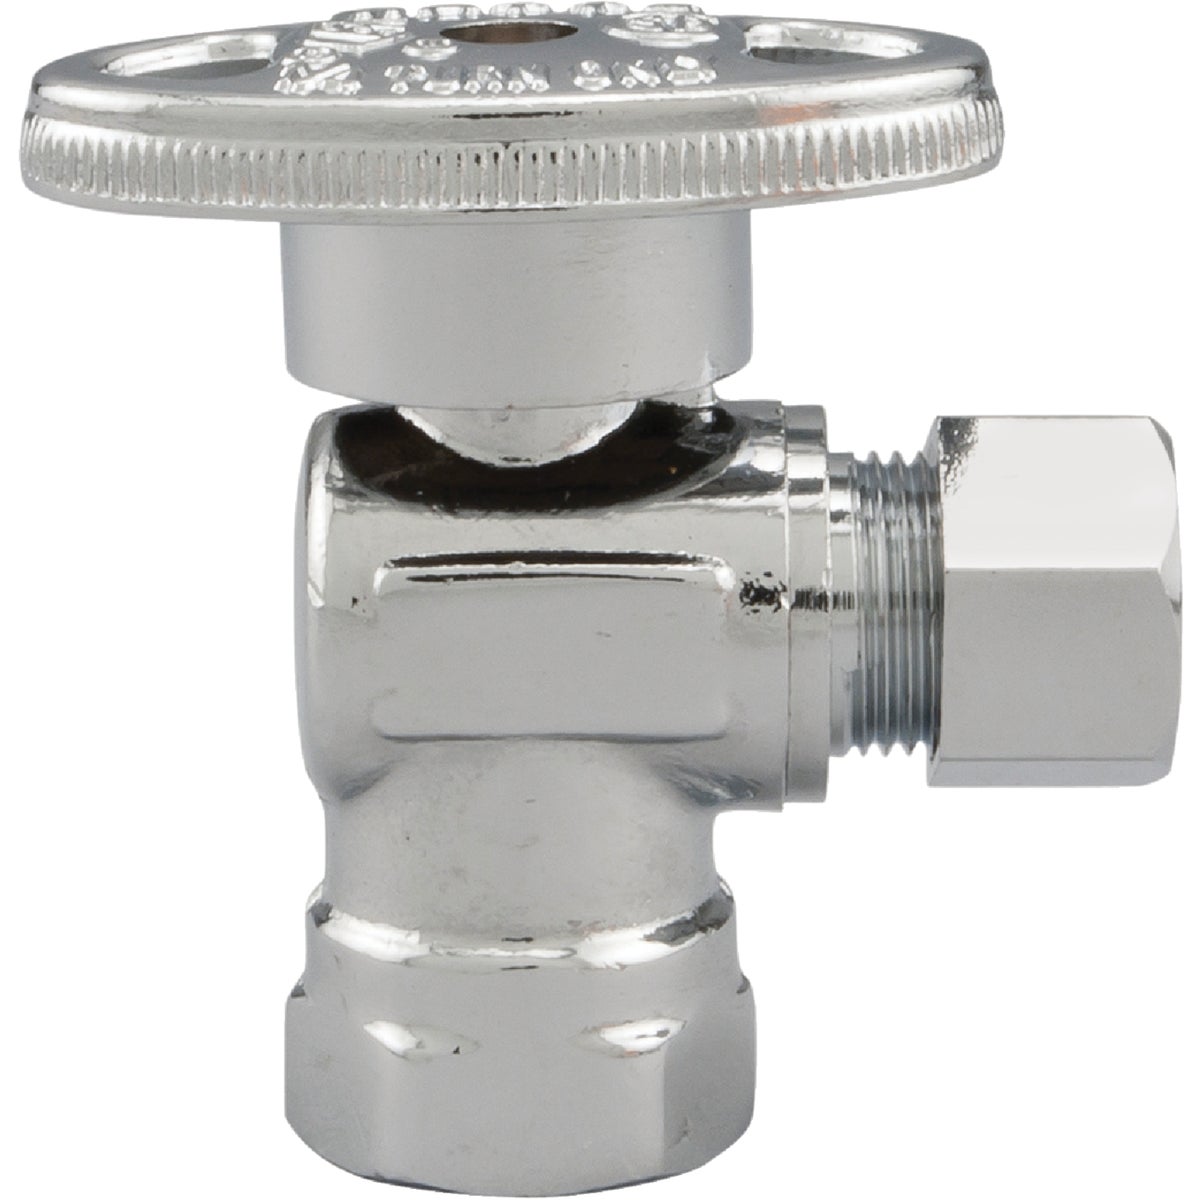 Item 400752, 1/4-turn angle valve controls water flow to household plumbing fixtures.